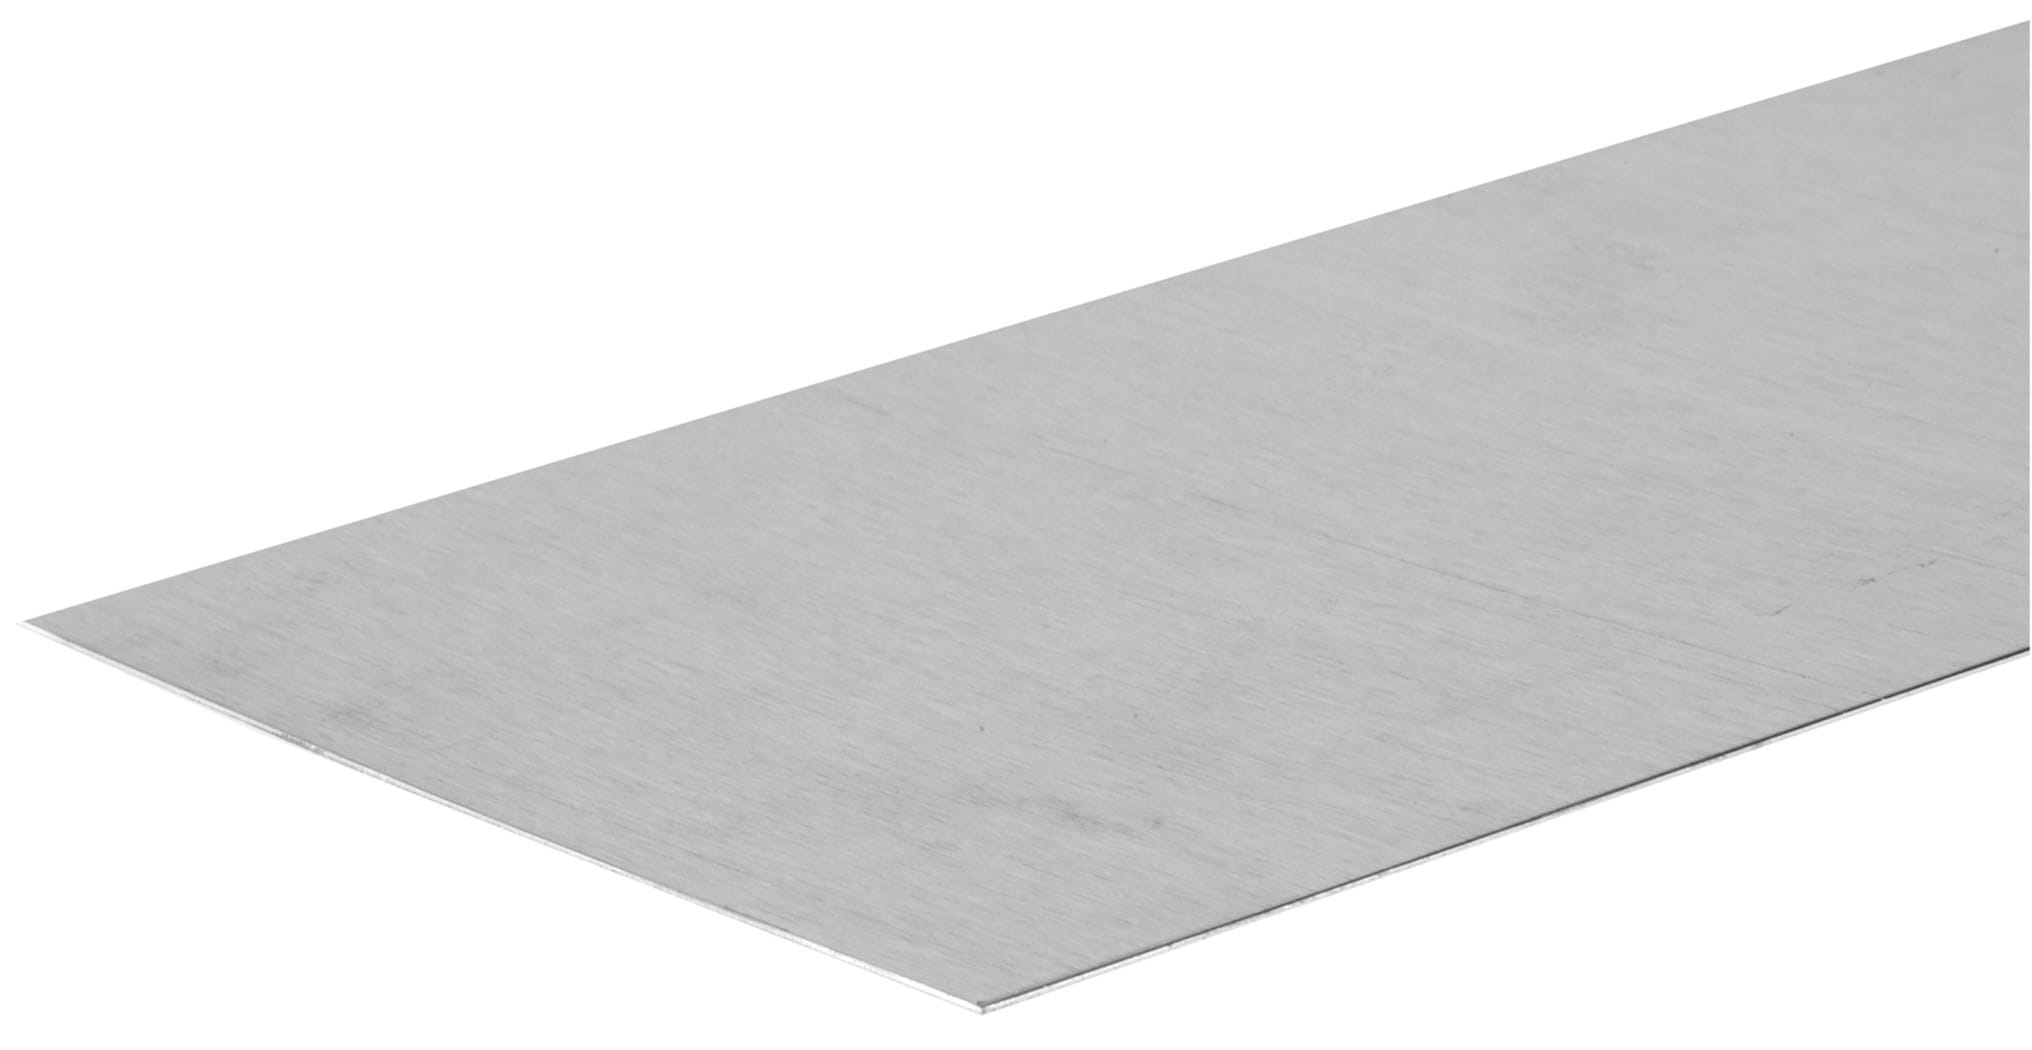 Hillman 24-in x 24-in Aluminum Solid Sheet Metal in the Sheet